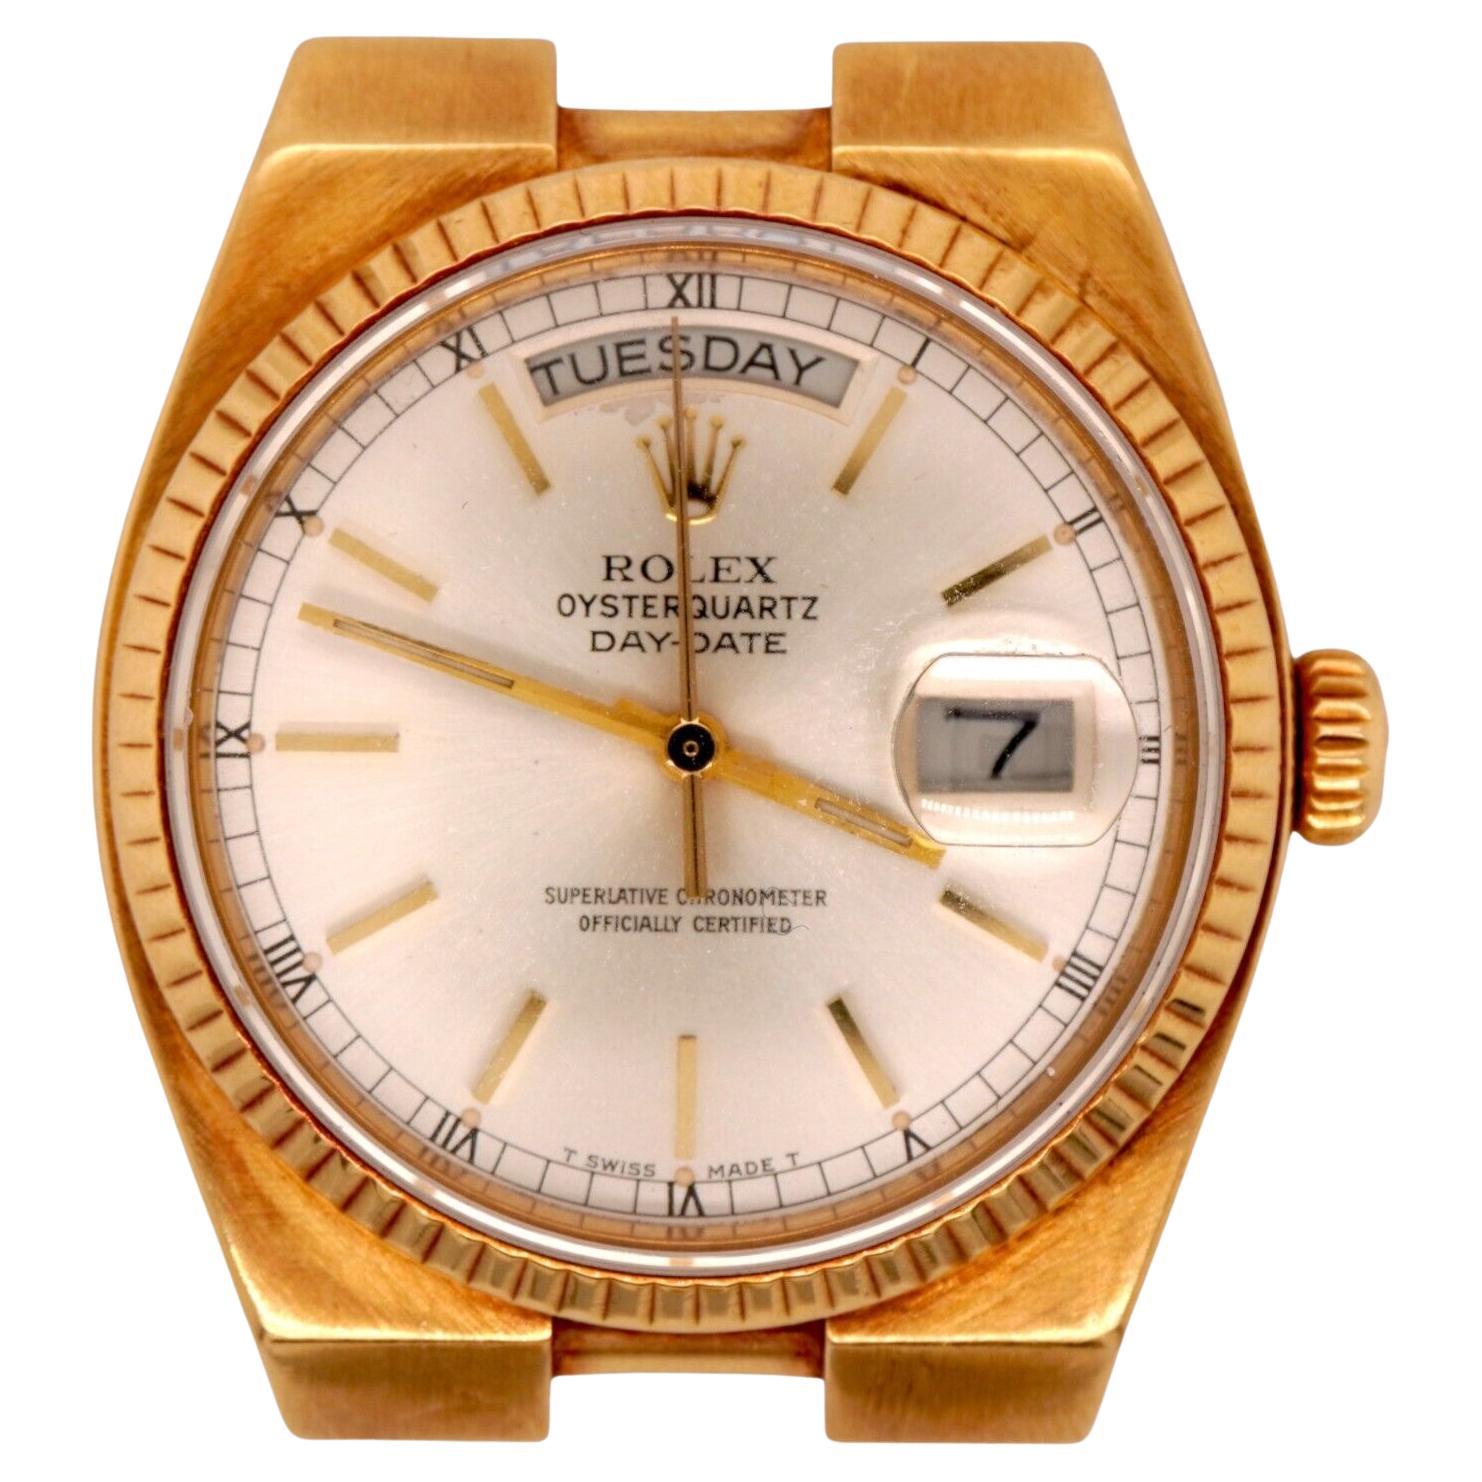 Rolex OysterQuartz Day-Date 36mm 18k Yellow Gold Mens Watch Silver Dial 19018